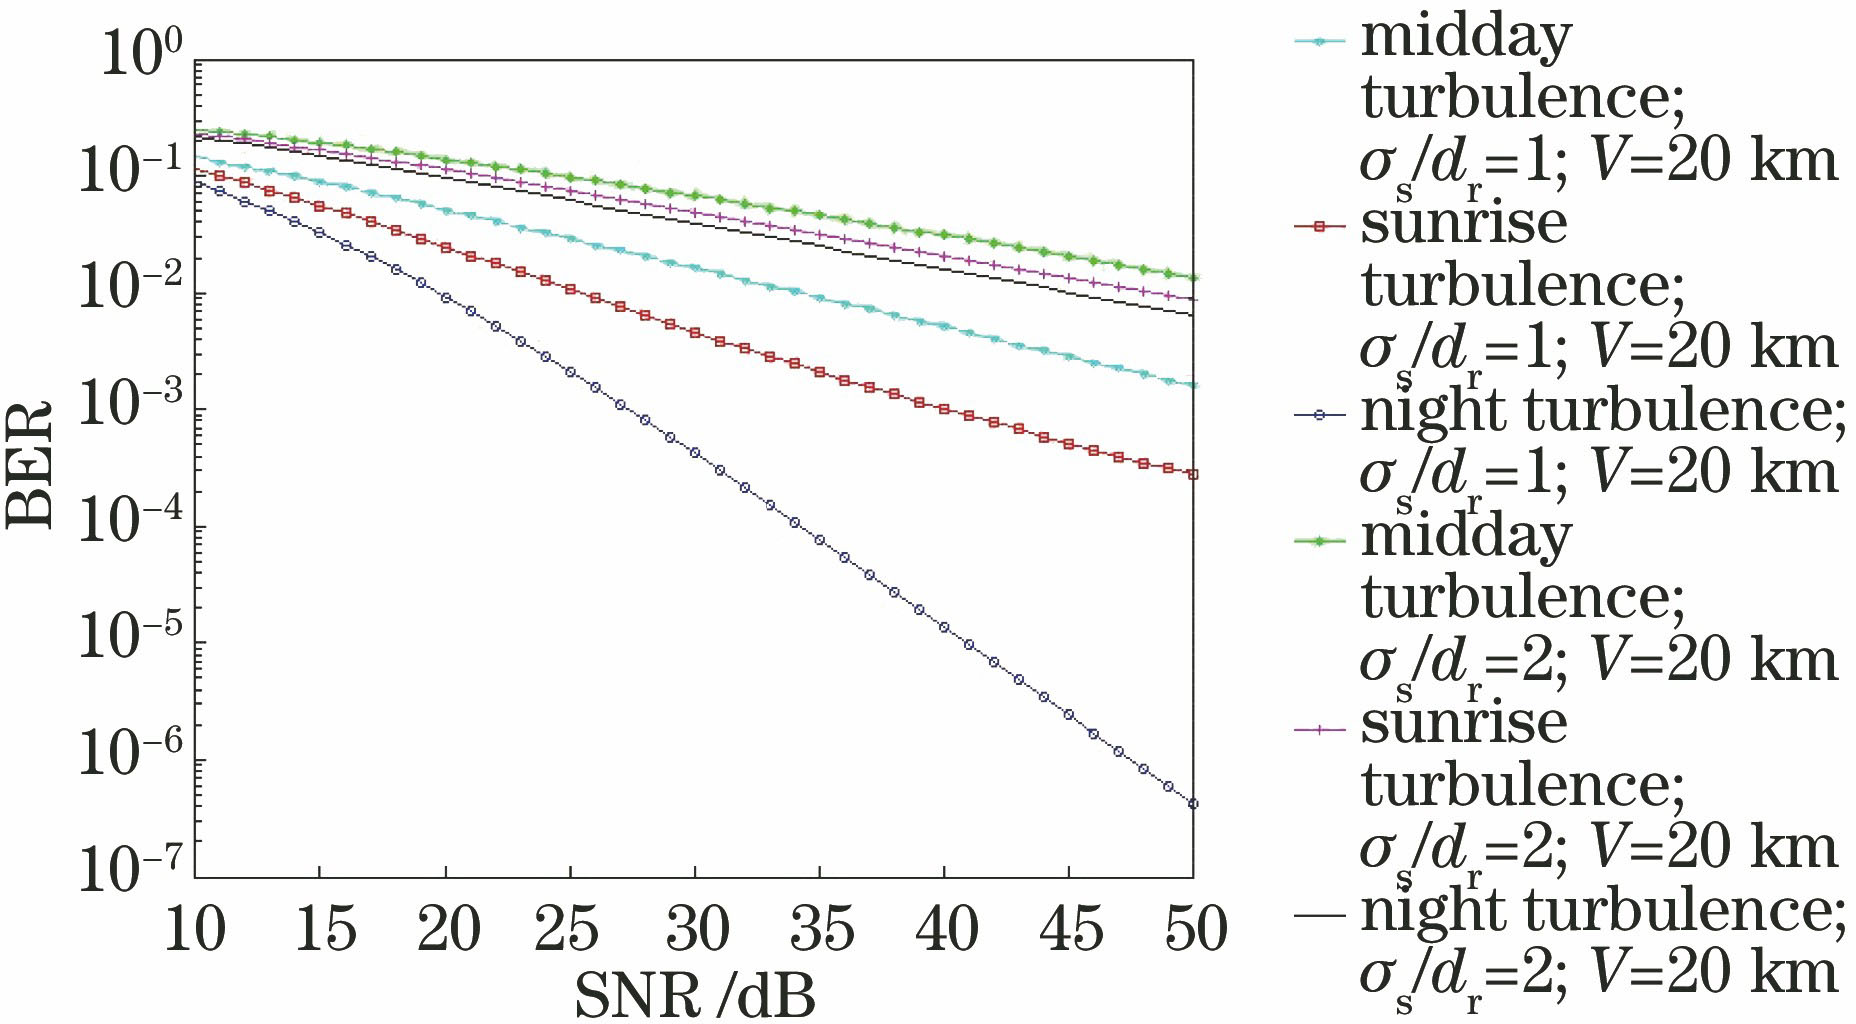 Change of average BER with SNR under different conditions